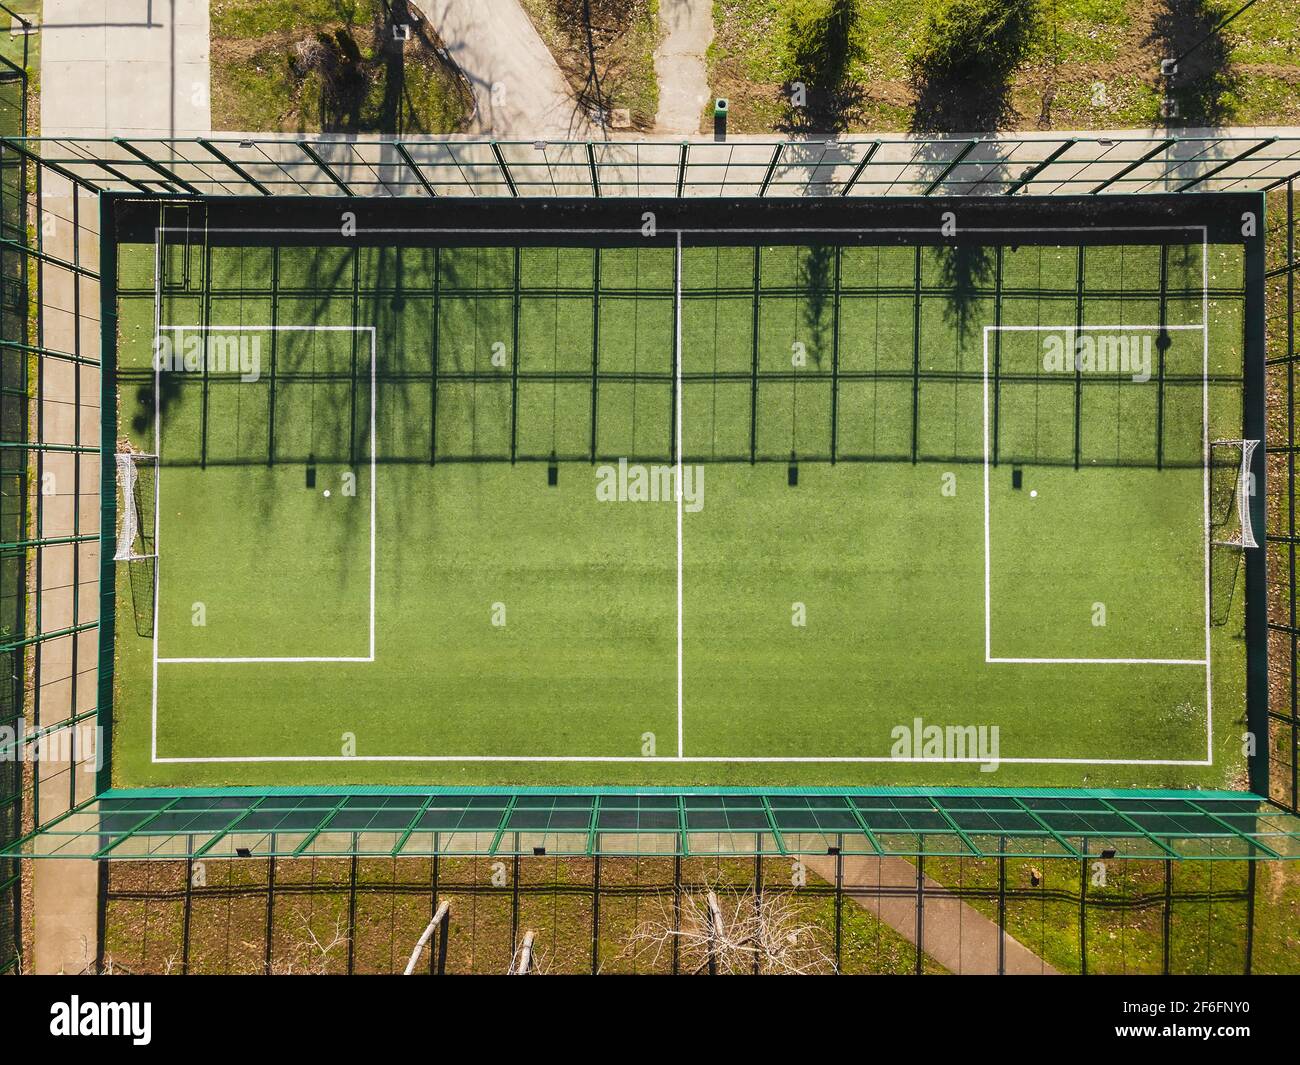 Drone View Of Street Soccer Court. Outdoor sport ground with green surface for playing football  or soccer  in urban area, detail, drone view Stock Photo